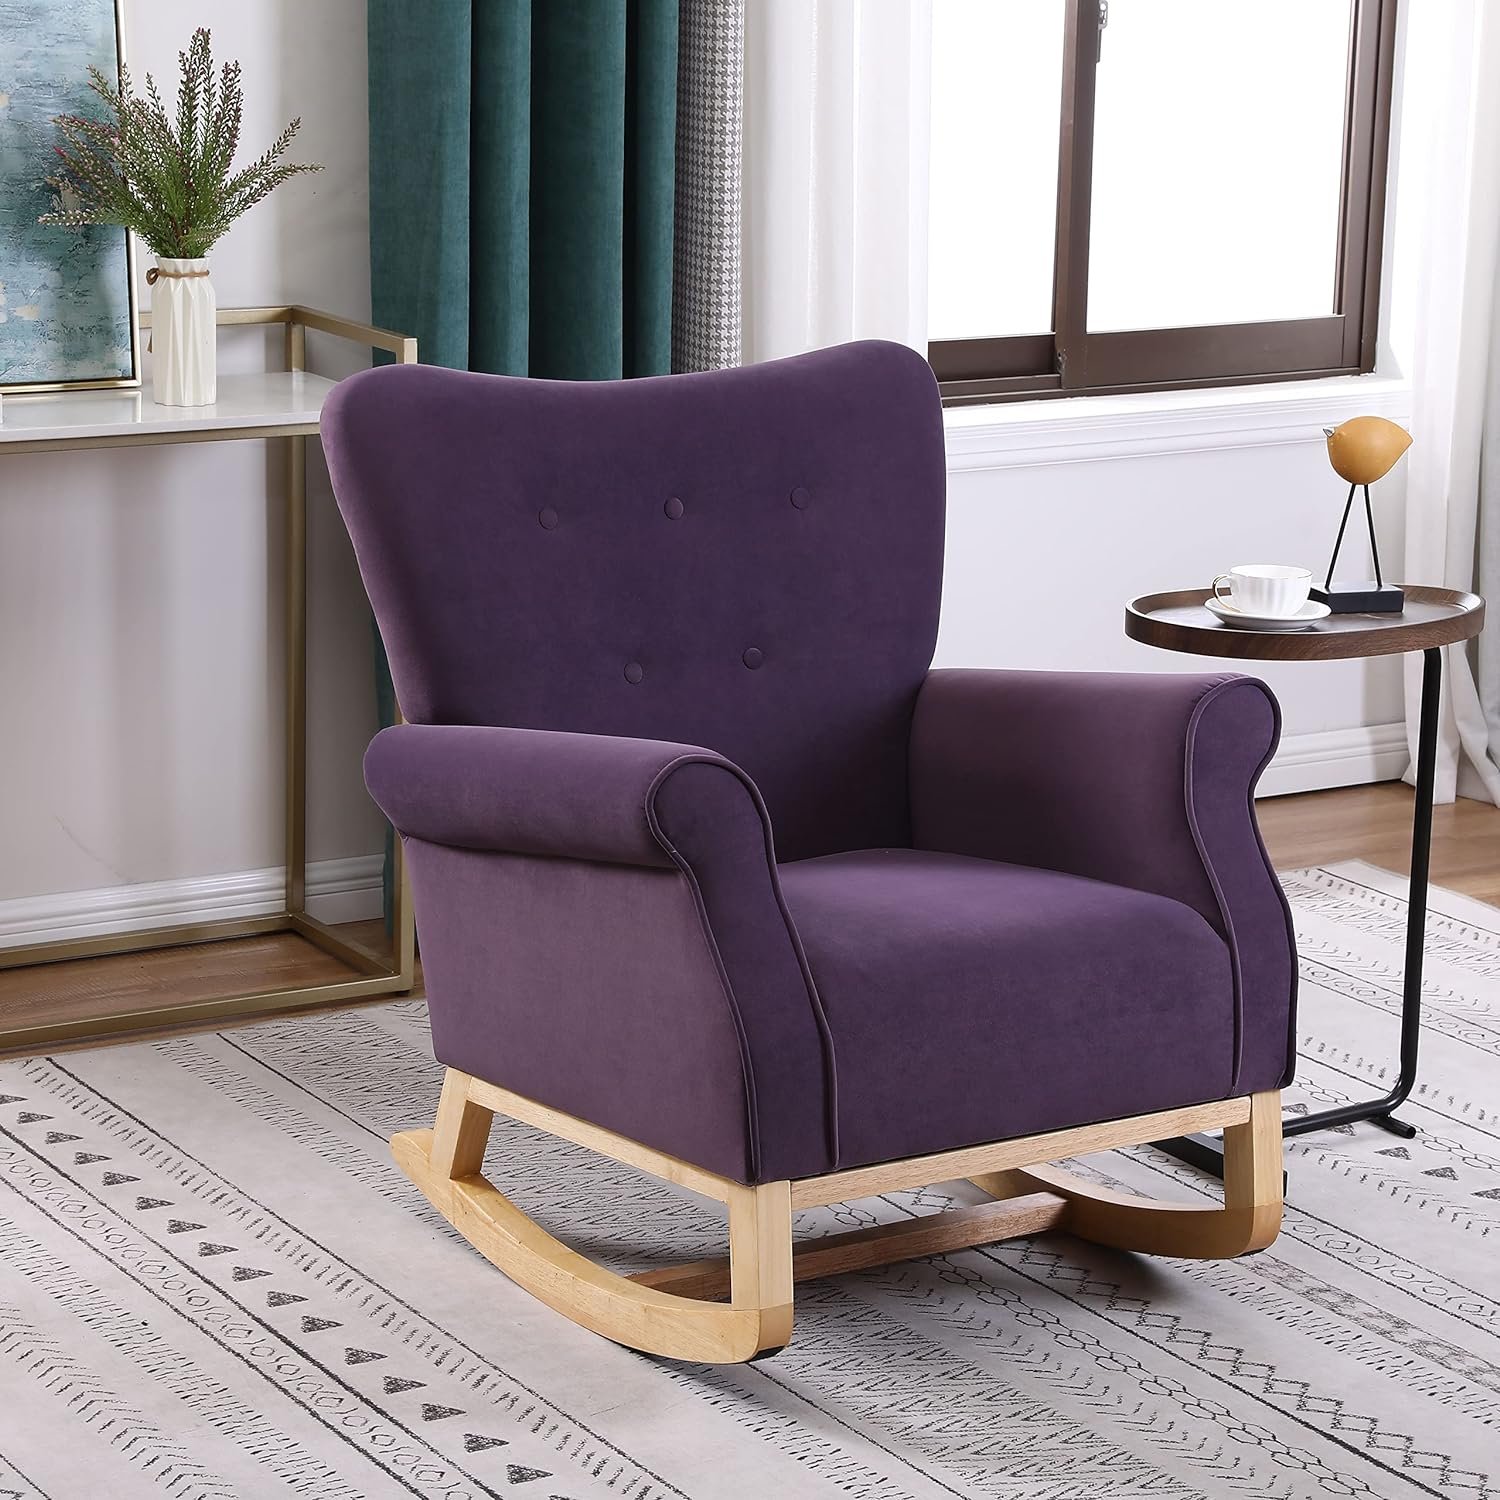 Anti-Tipping Design Chair Review